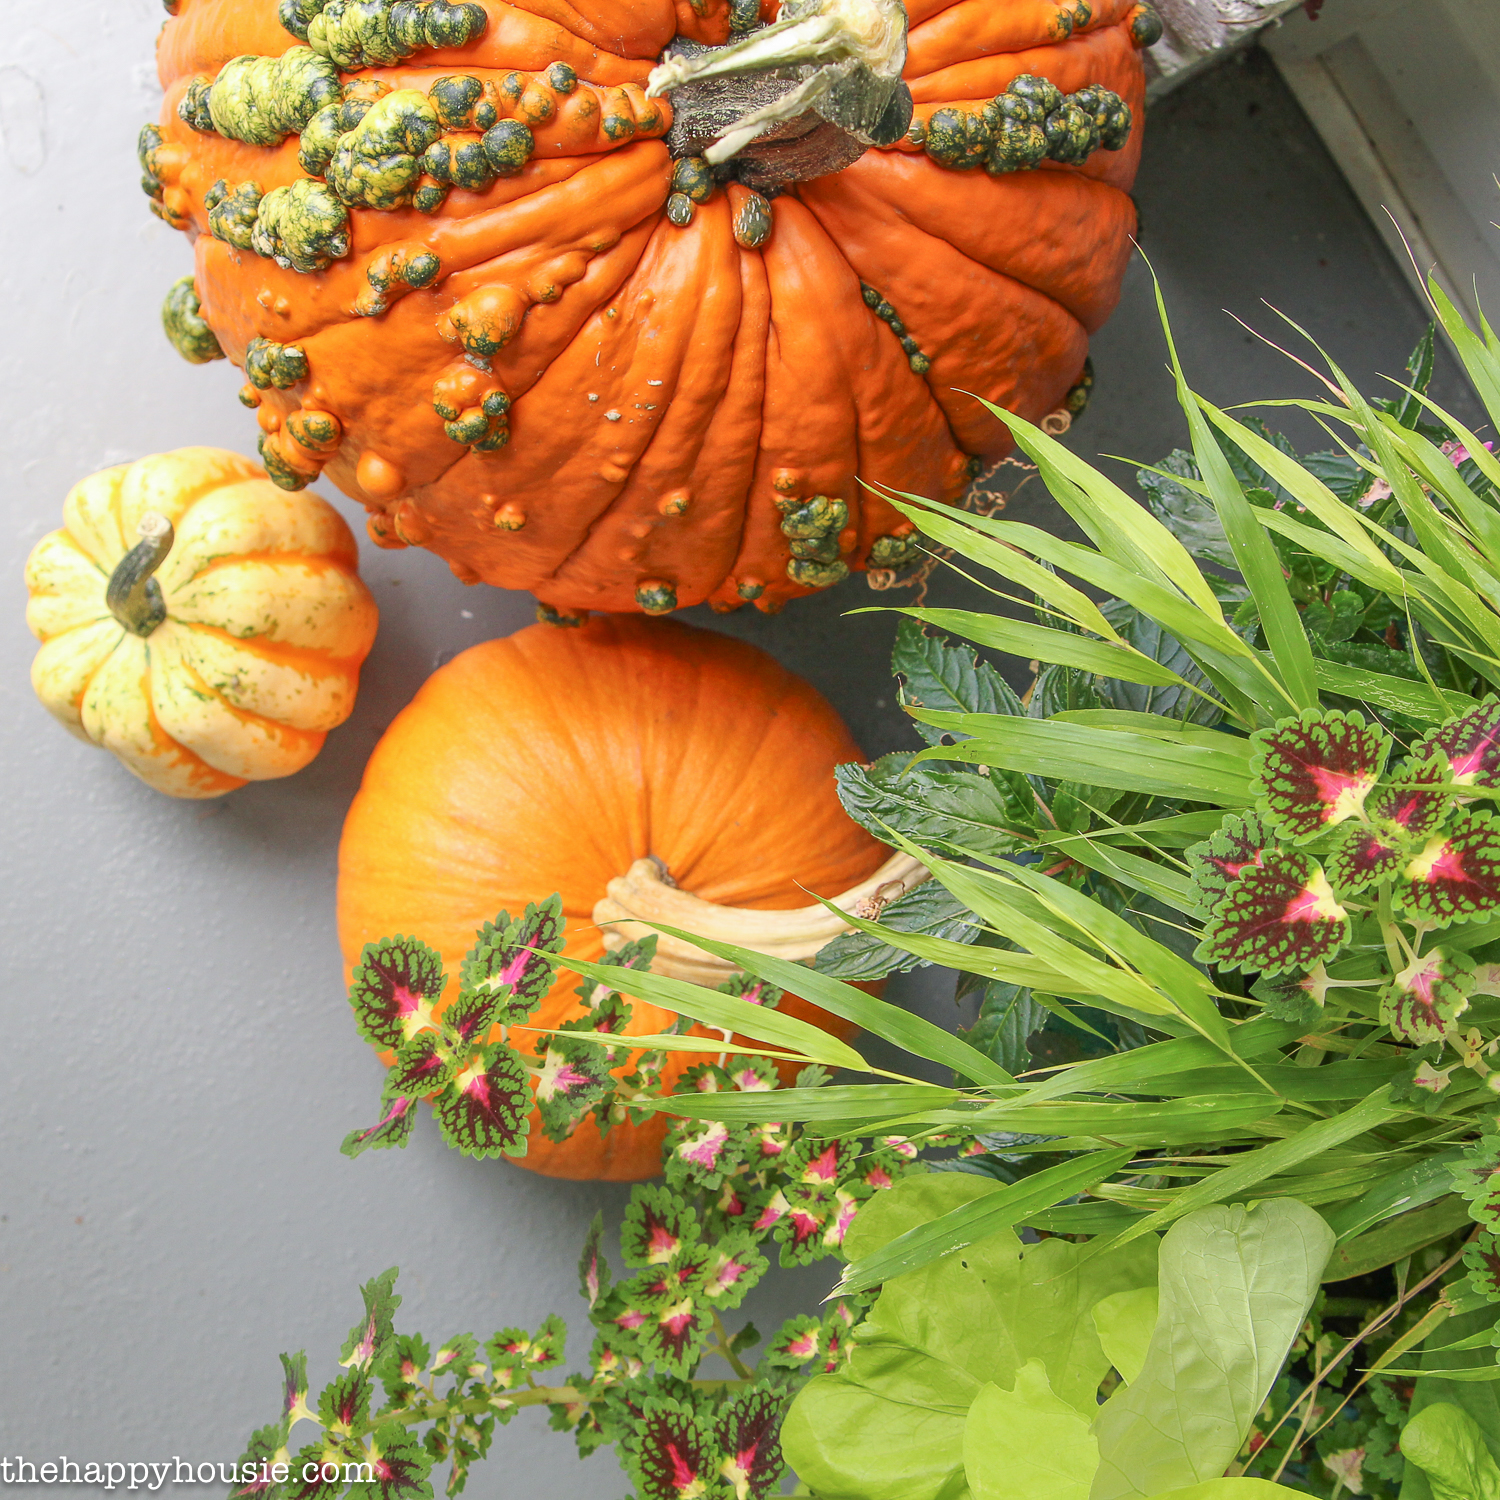 The three pumpkins are beside a potted plant on the porch.